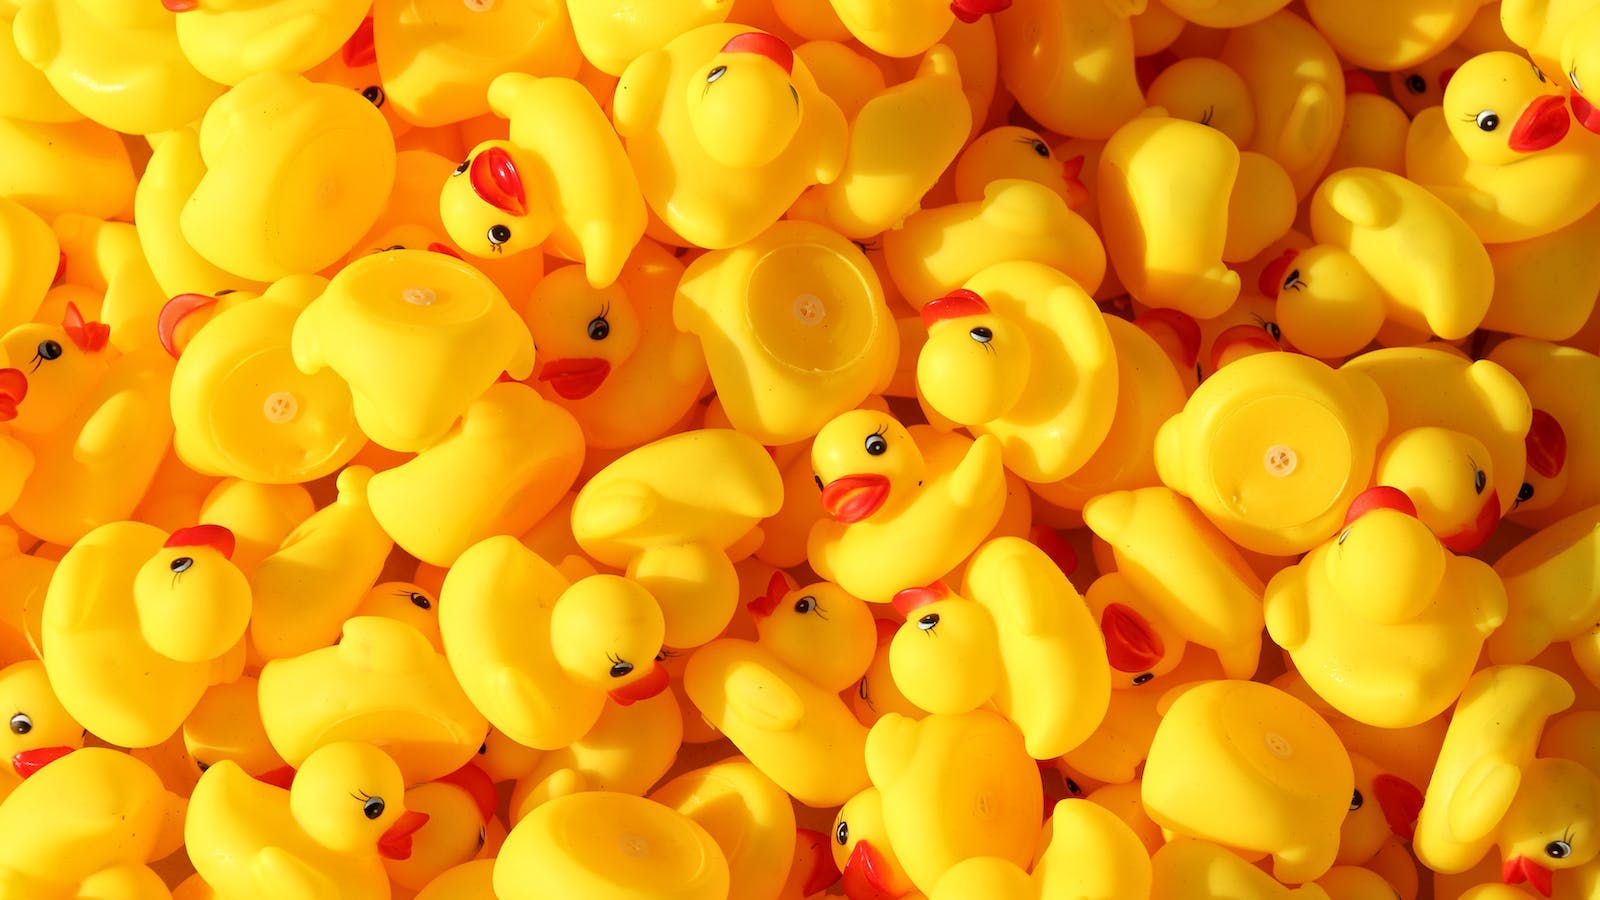 A picture of a pile of yellow rubber ducks